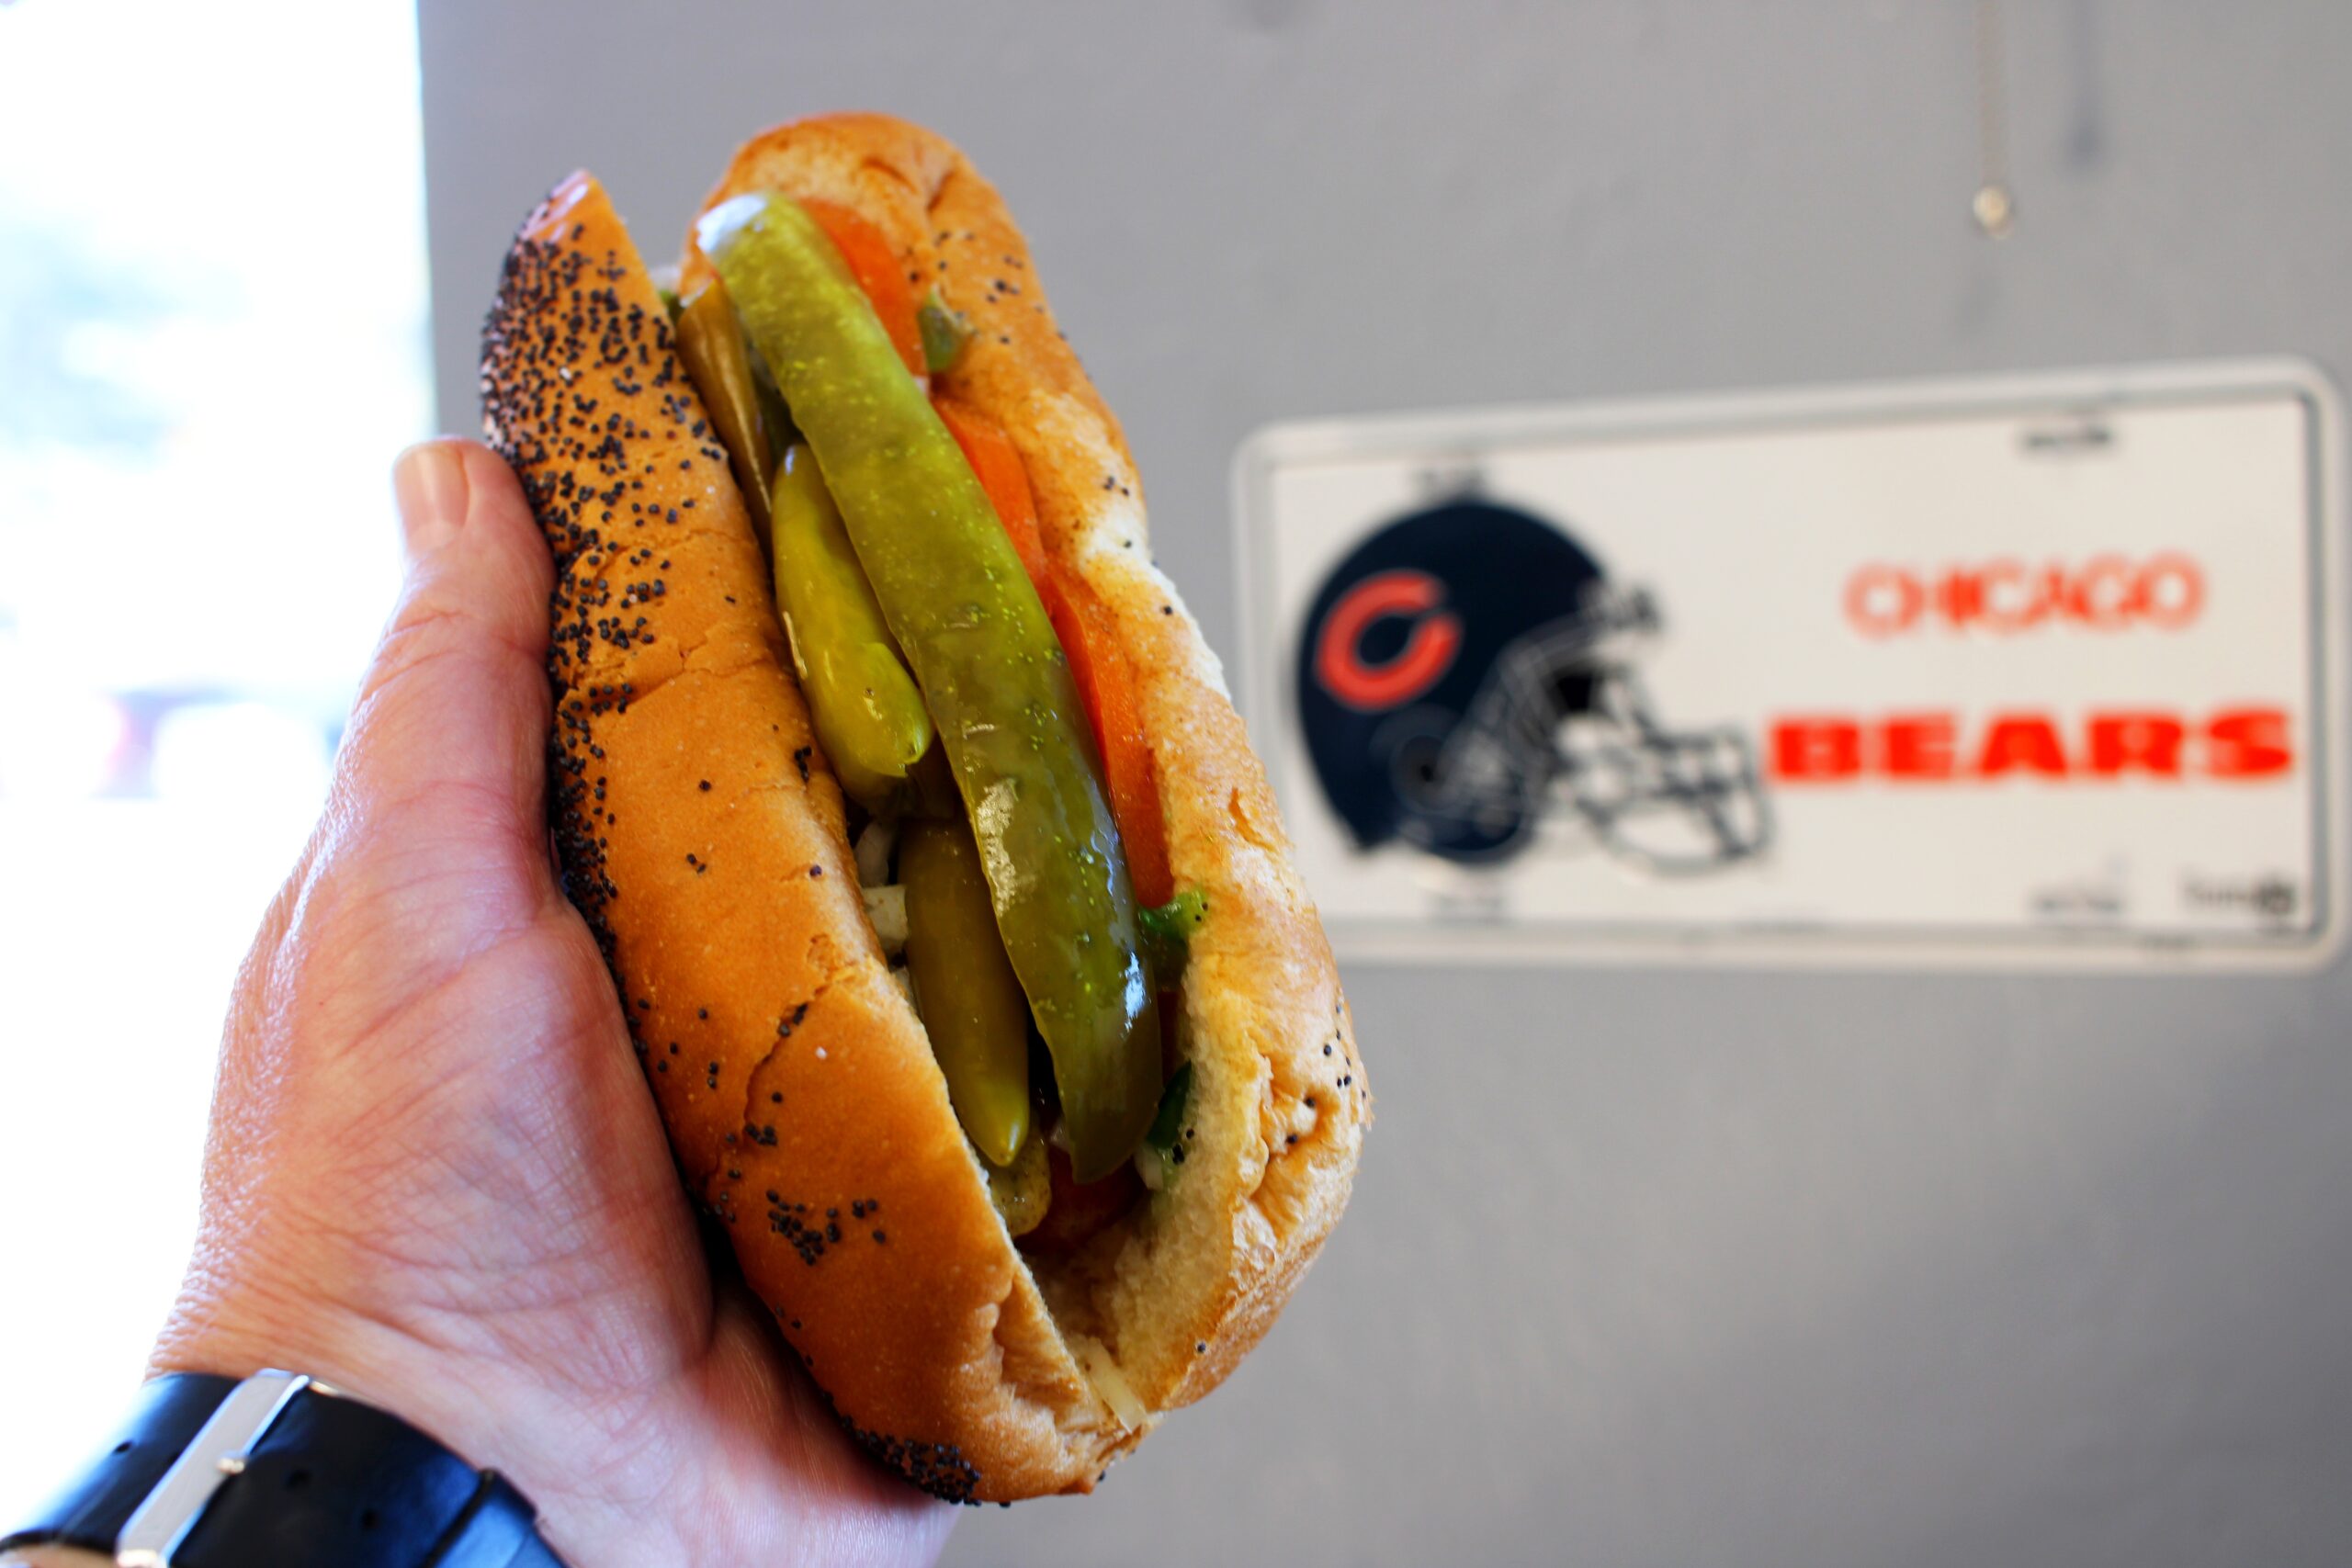 Chicago Dog at Tommy D's (Photo by Mark Whittaker)